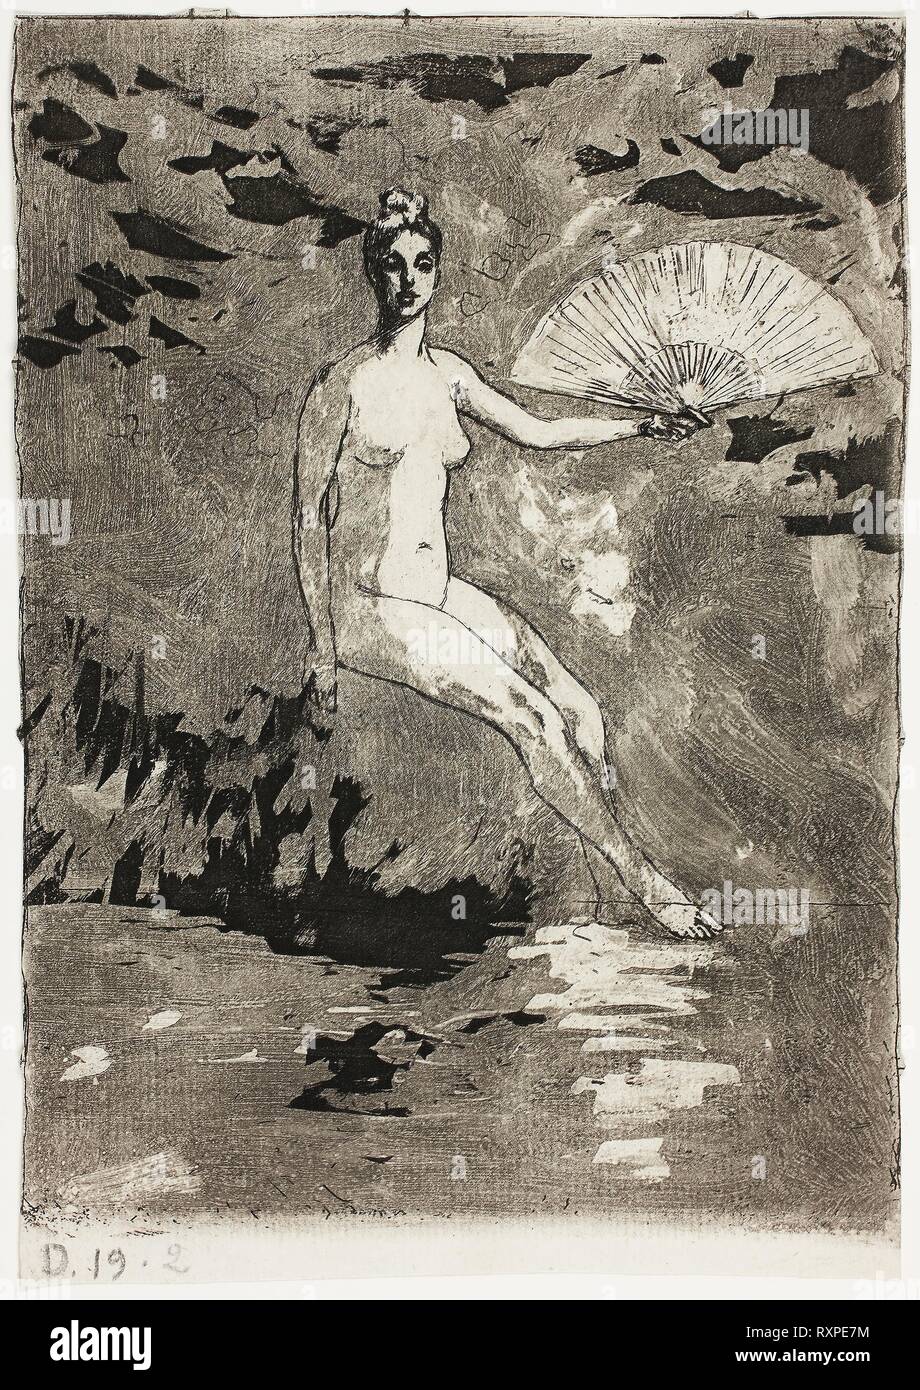 Summer (Color Version). Theodore Roussel; French, worked in England, 1847-1926. Date: 1890-1900. Dimensions: 175 × 124 mm. Etching, aquatint and lavis in gray and black on ivory laid paper. Origin: England. Museum: The Chicago Art Institute. Stock Photo